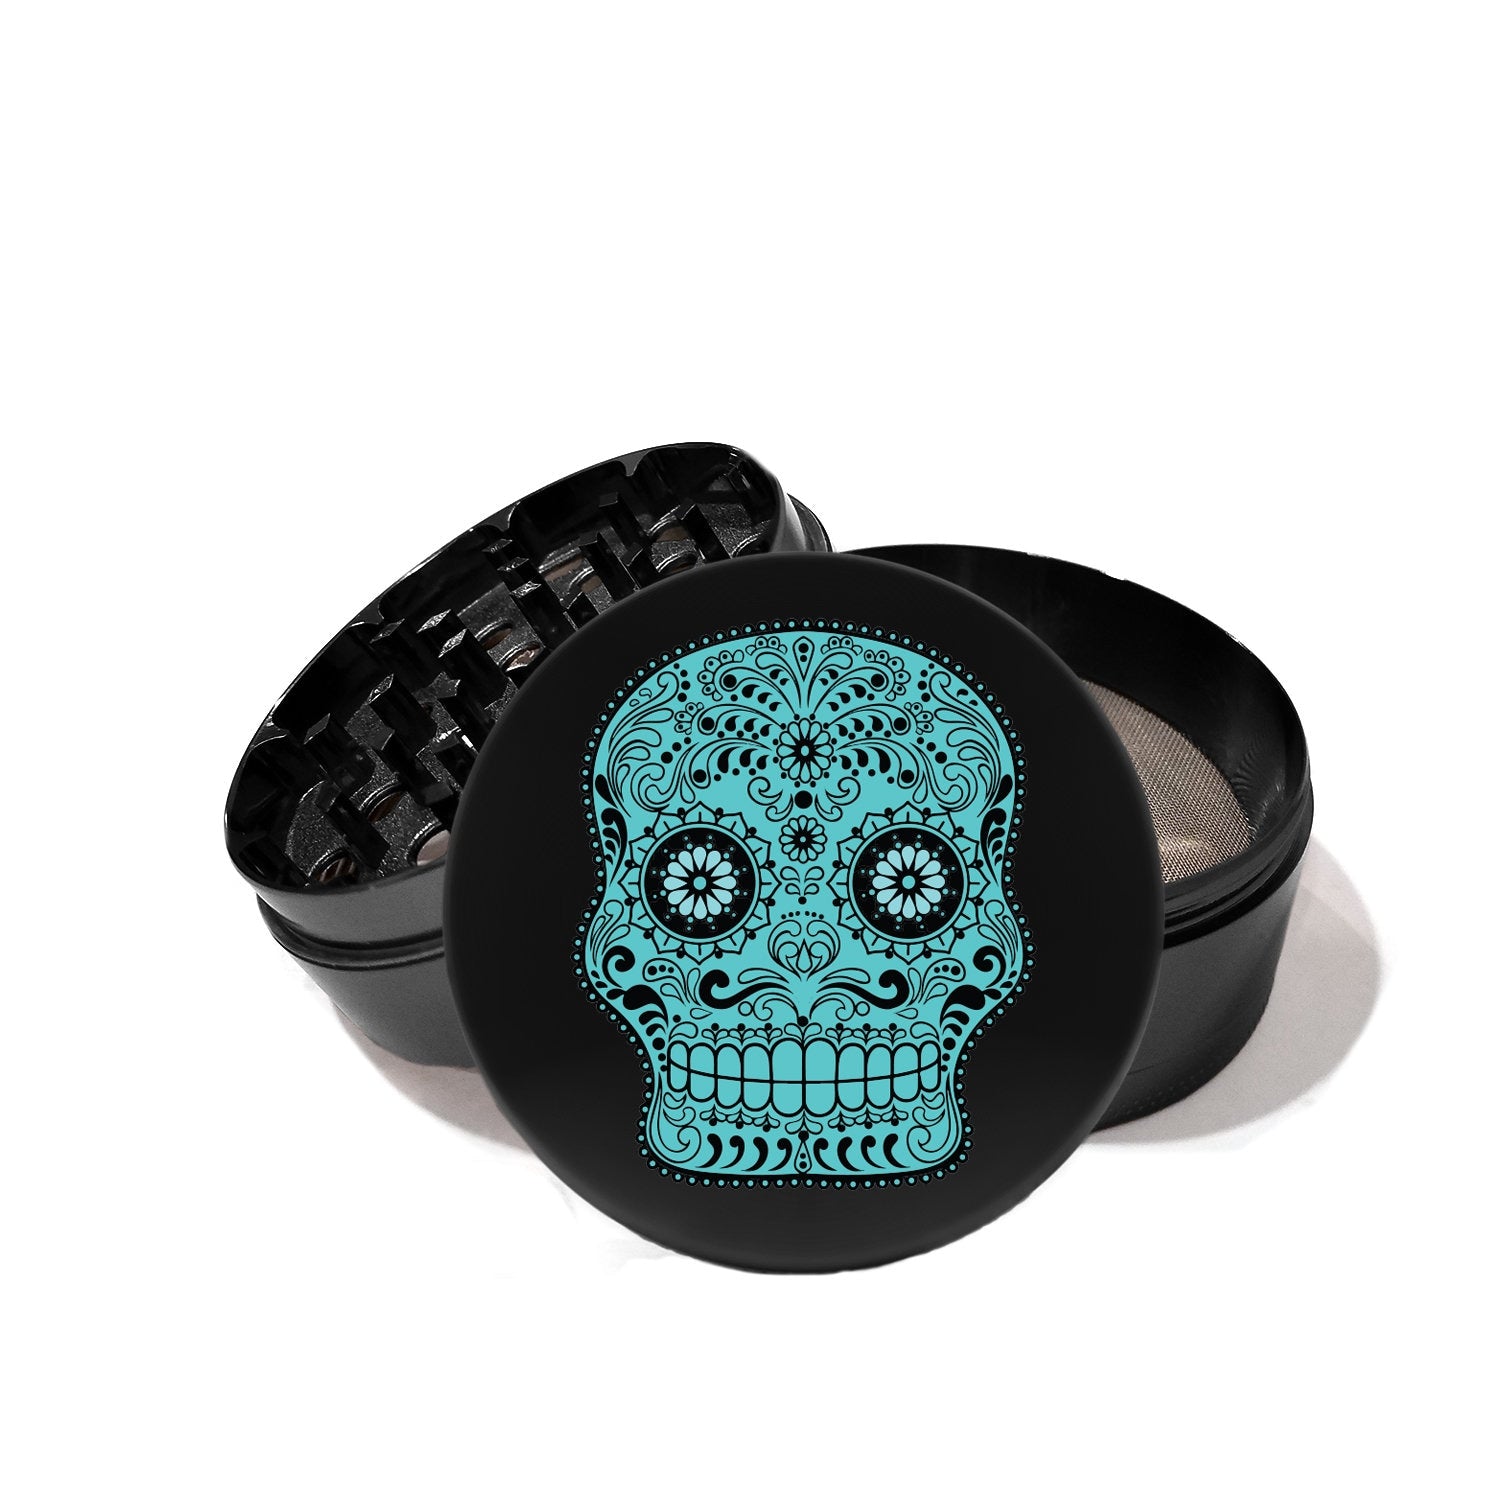 ORE - Black w/ Colorful Skull on Top - Metal Grinder (12pc) (OLY-G114) - MK Distro